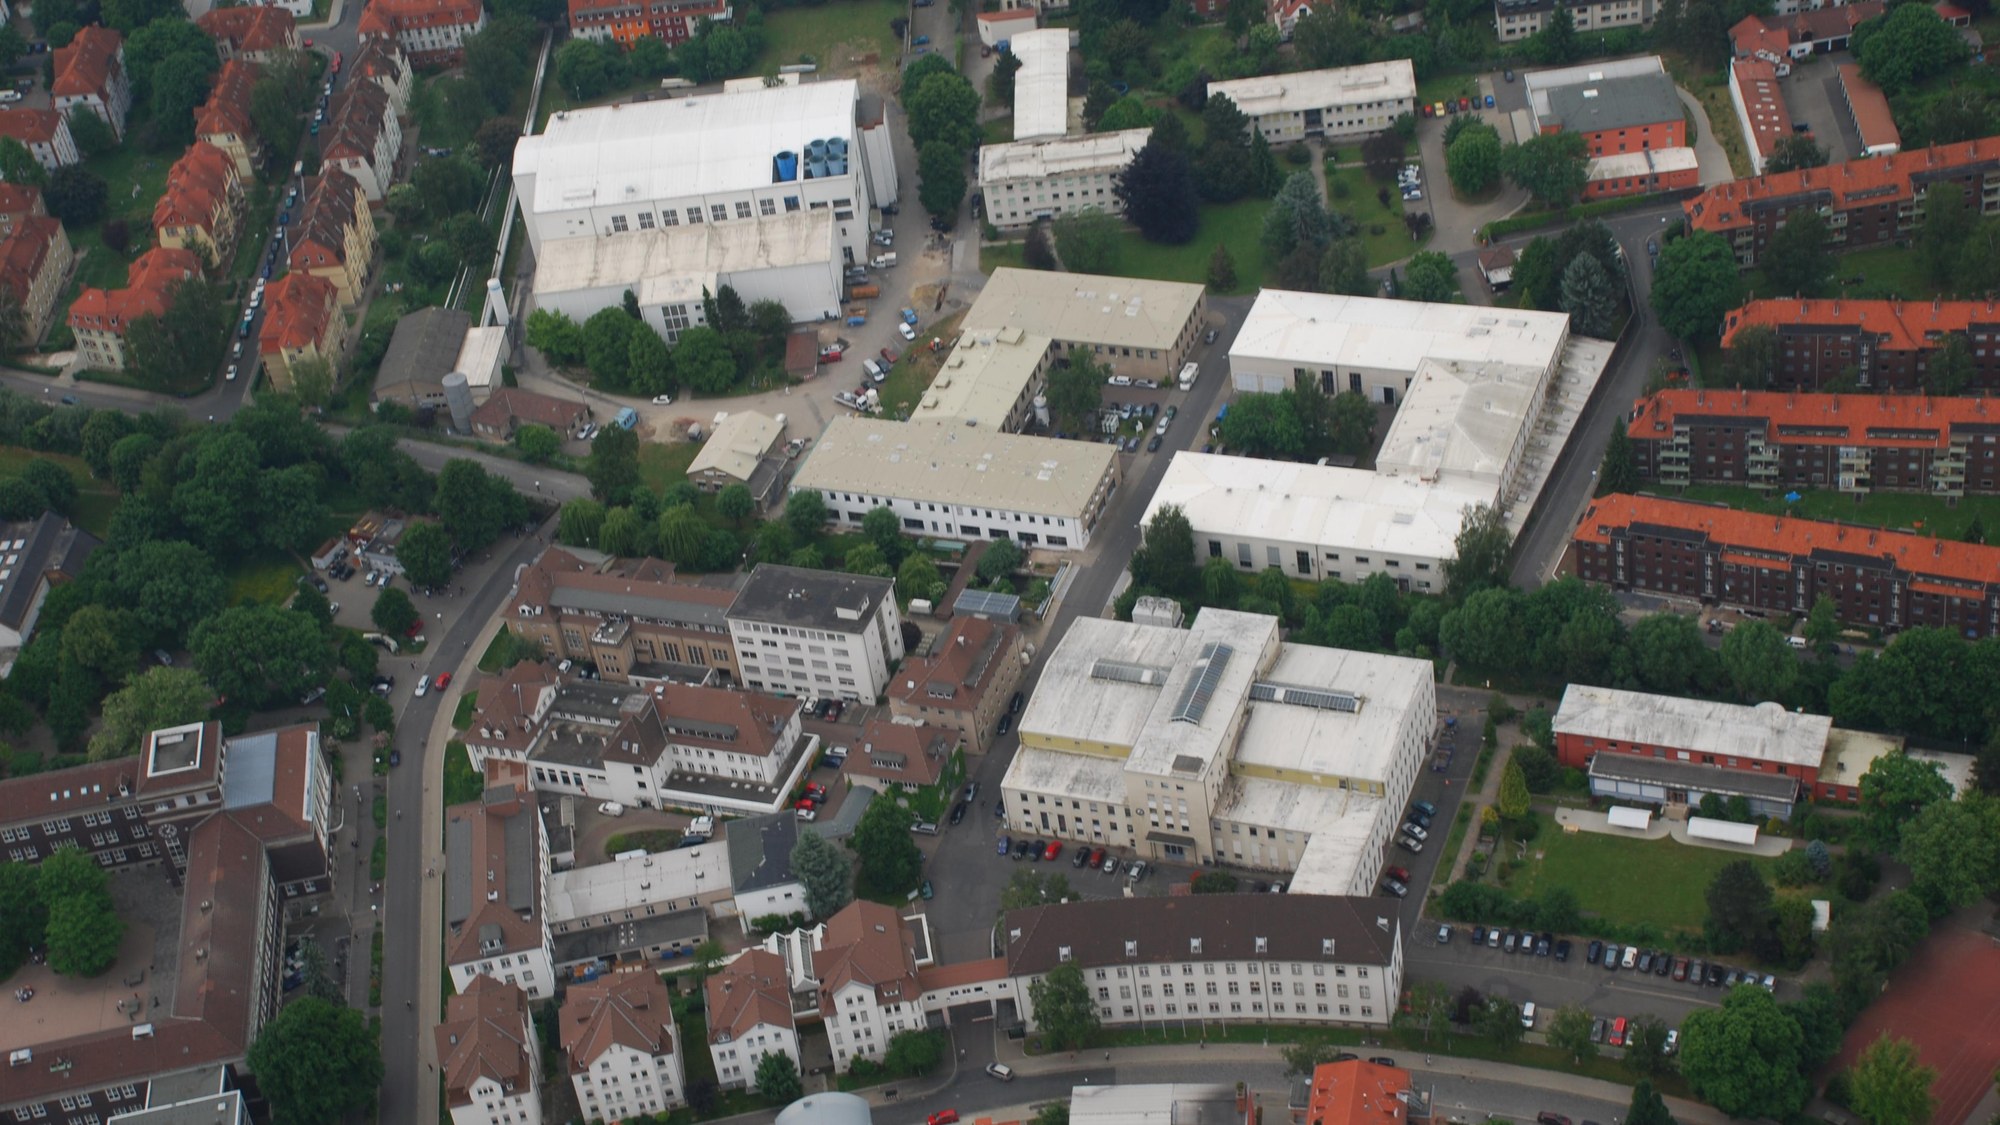 Aerial view of the DLR site in Göttingen.